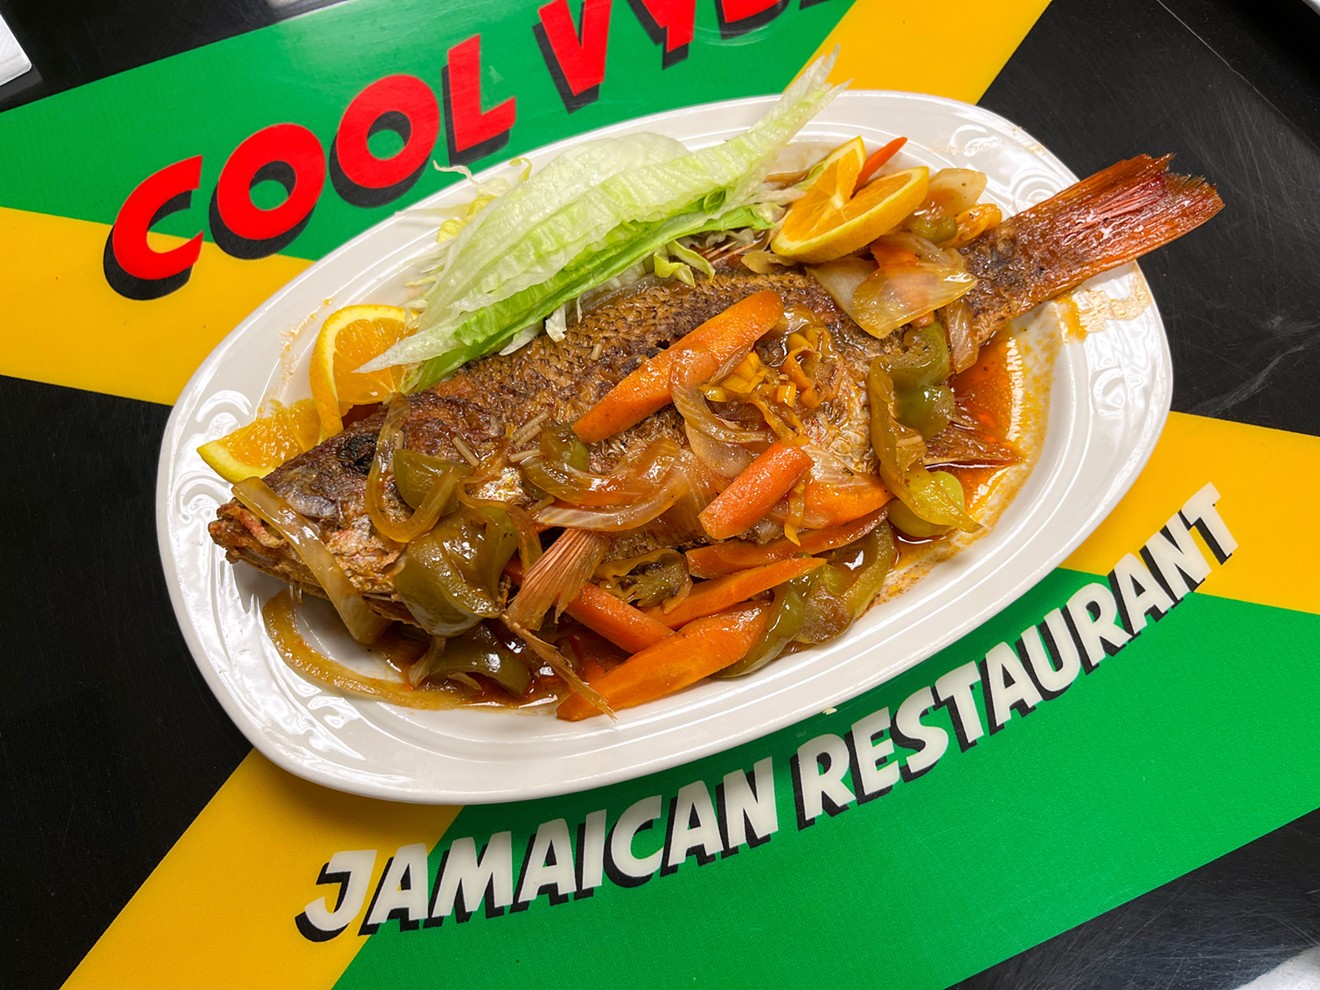 Brown stew fish, deftly fried and smothered with a vibrant sauce, is one of the menu highlights at Cool Vybz.